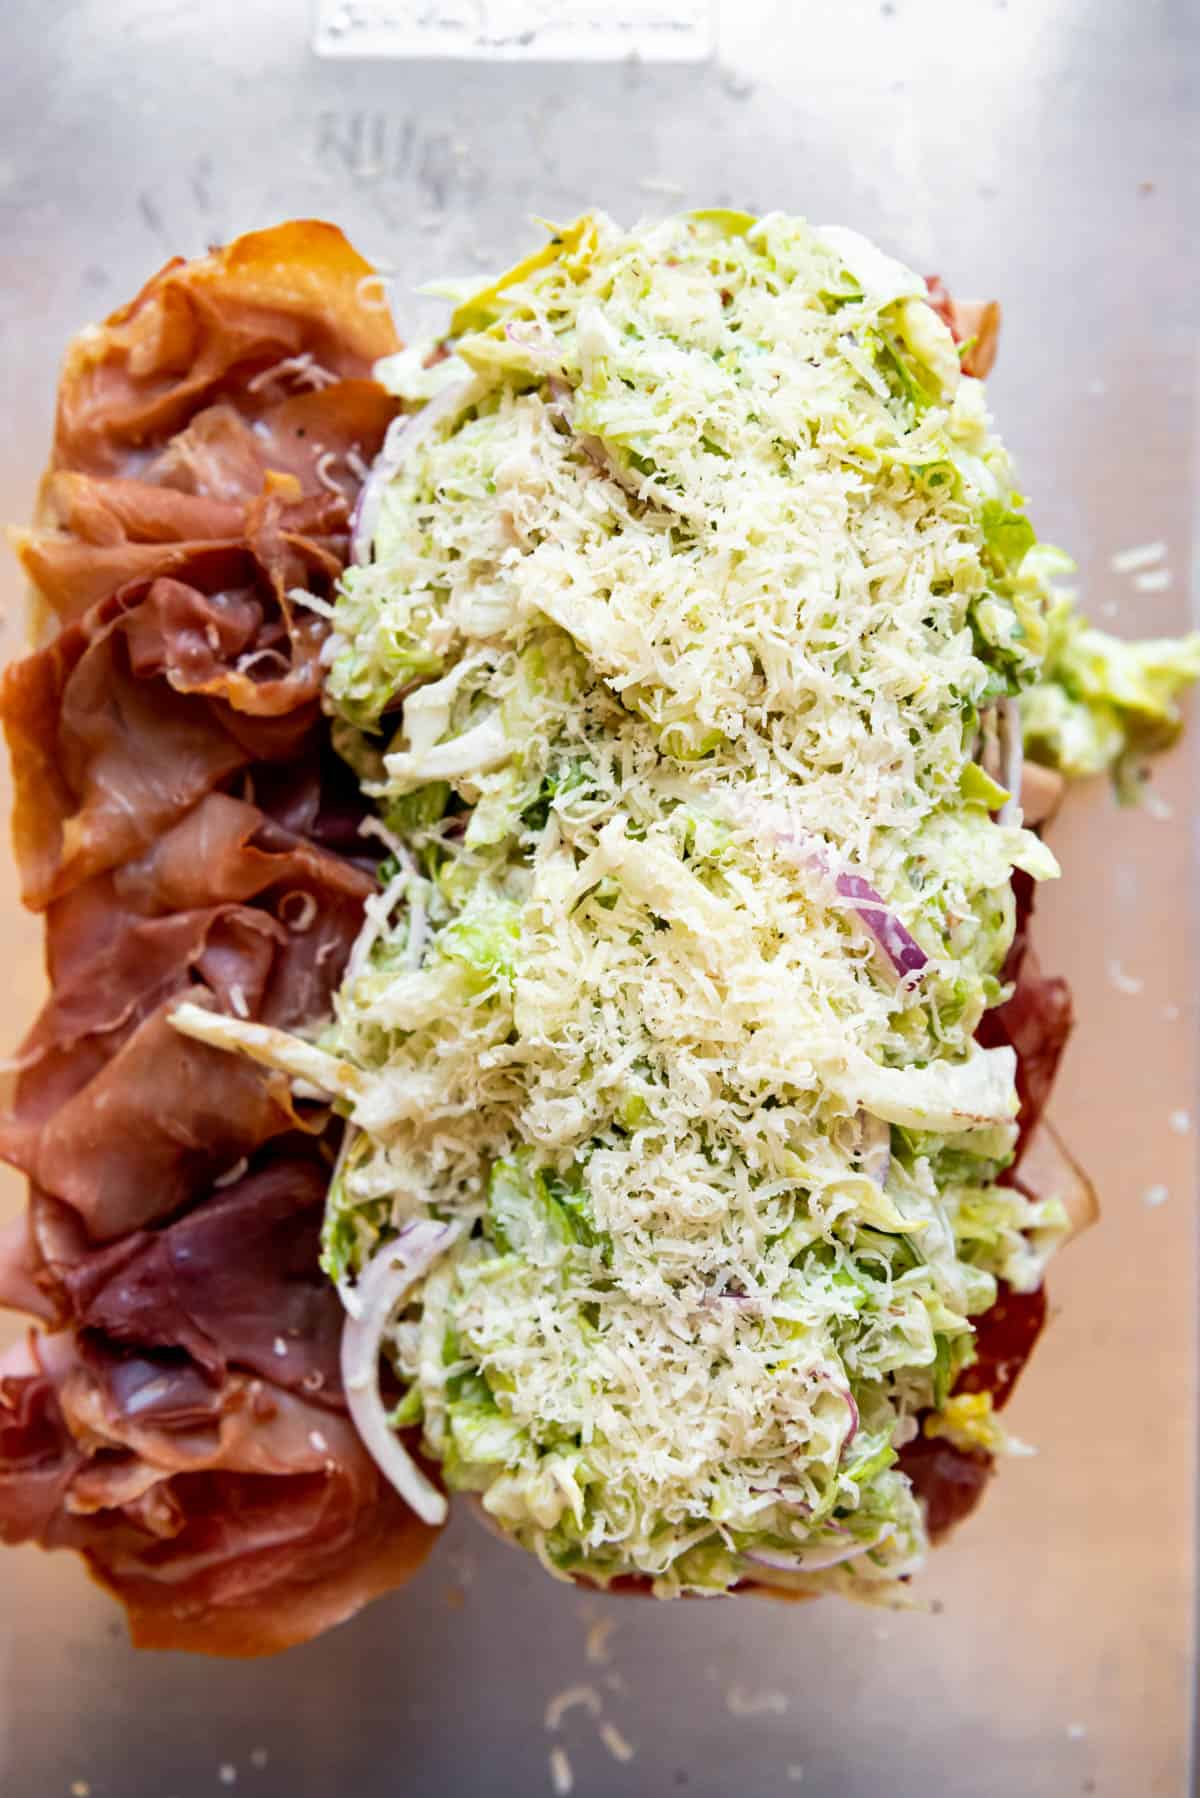 Piled grinder salad with freshly grated parmesan cheese on an Italian grinder sandwich.